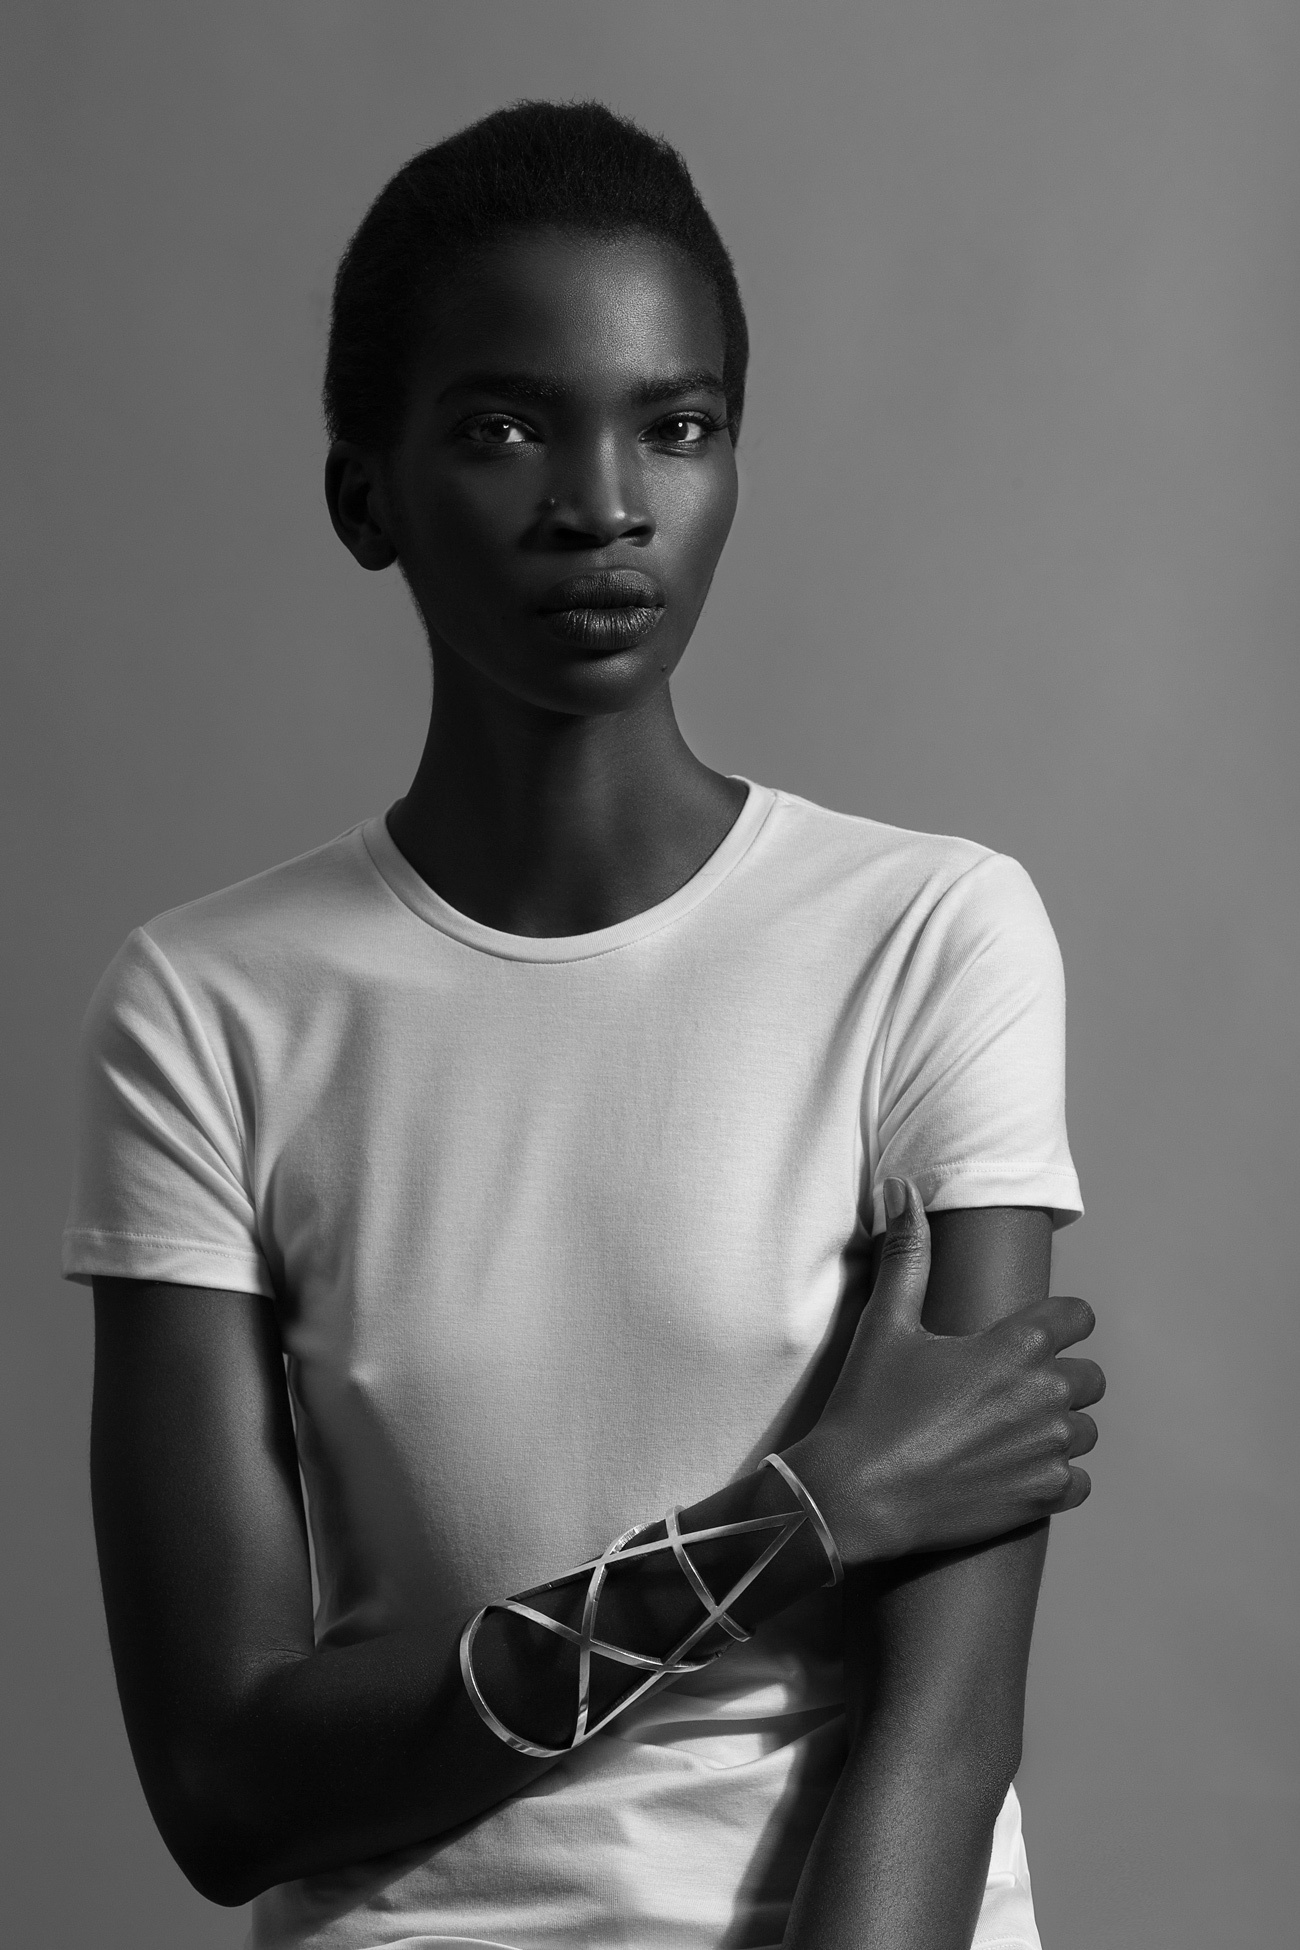 Aamito Lagum photographed by Remi Adetiba